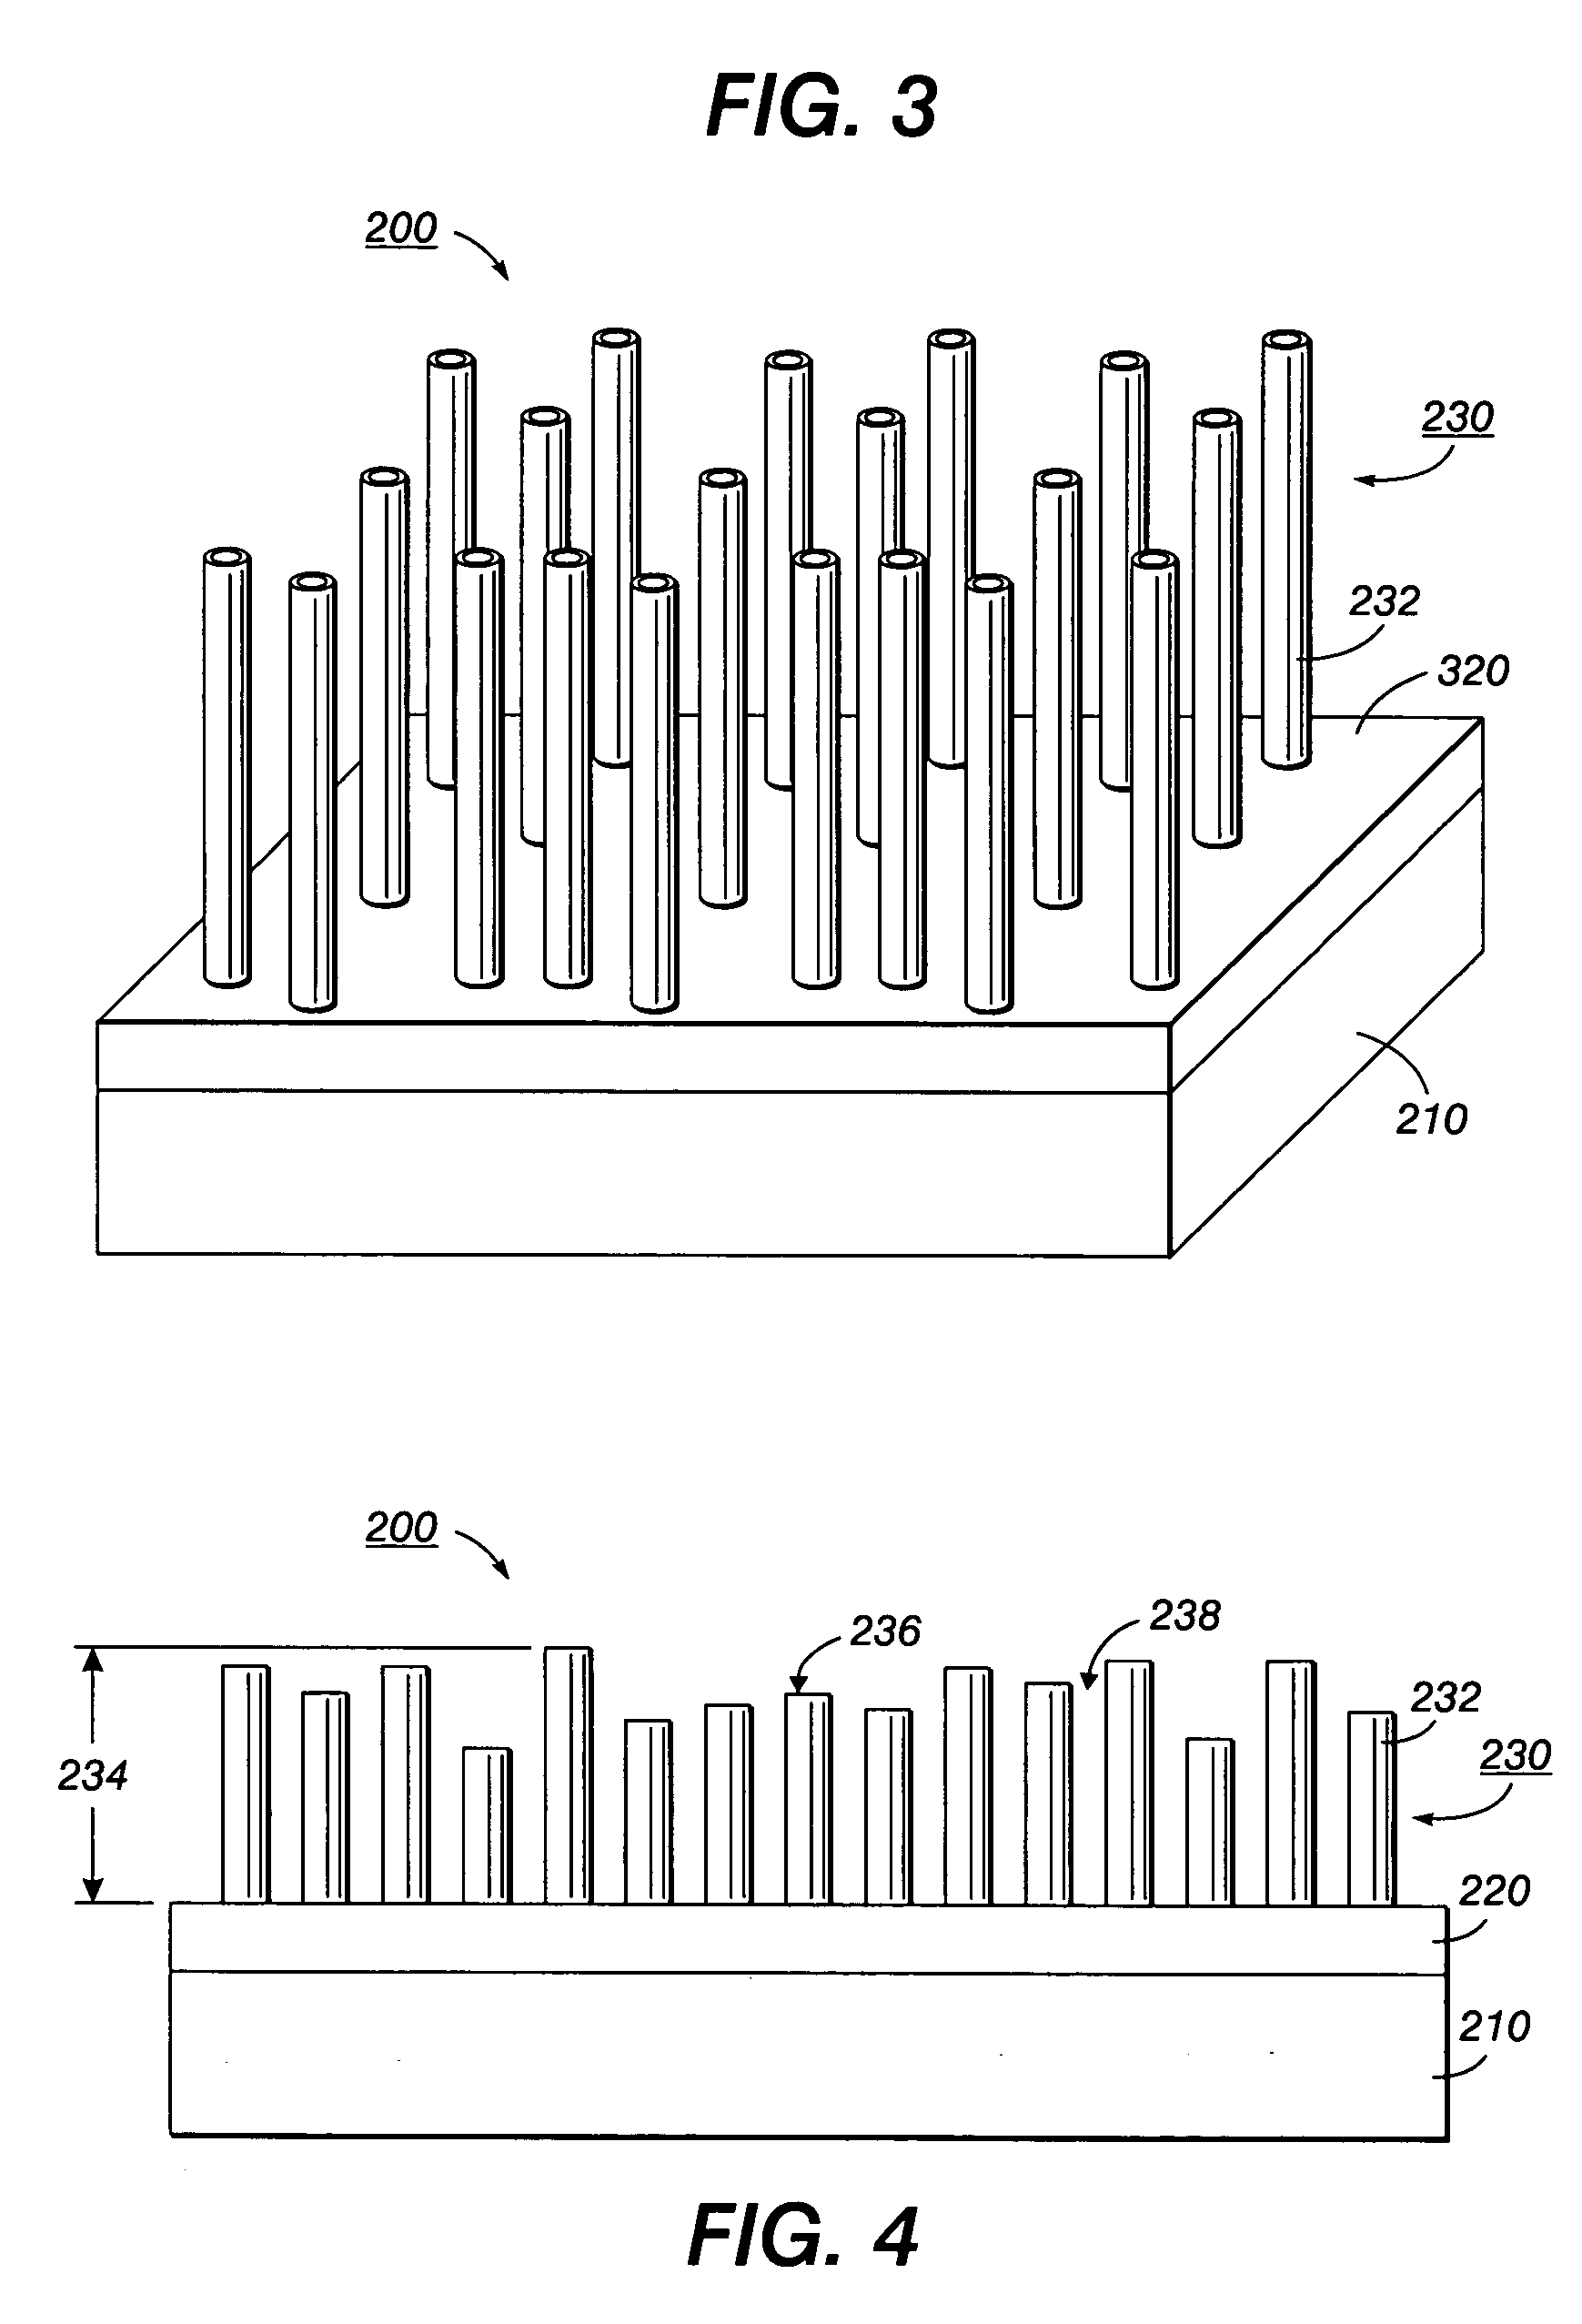 Systems and methods for electrical contacts to arrays of vertically aligned nanorods